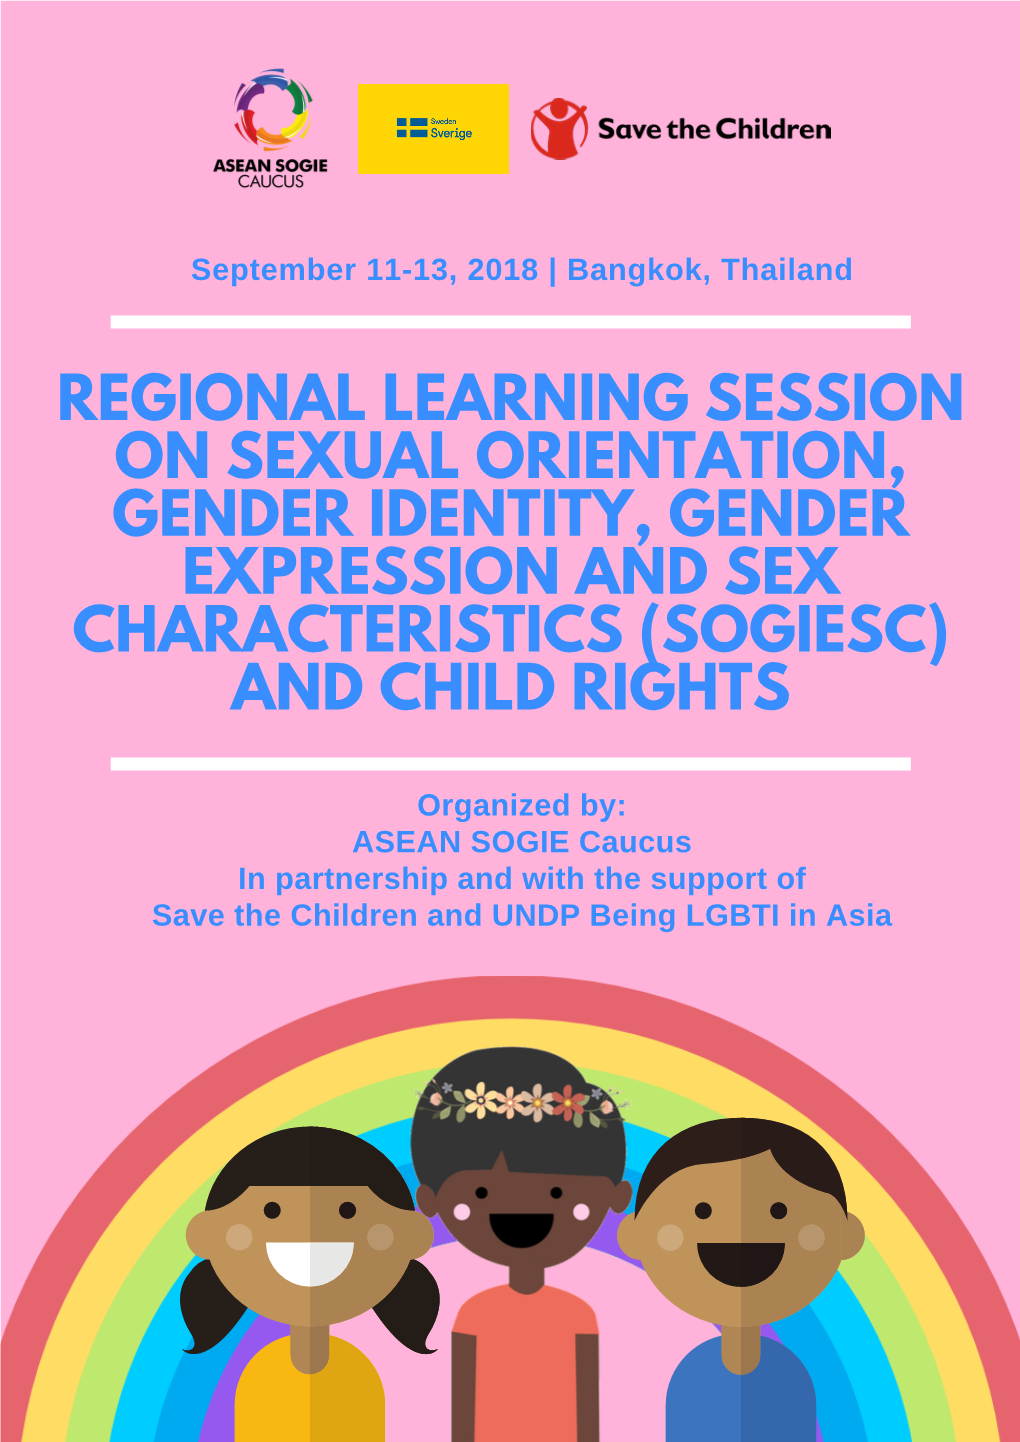 Regional Learning Session on Sexual Orientation, Gender Identity, Gender Expression and Sex Characteristics (Sogiesc) and Child Rights